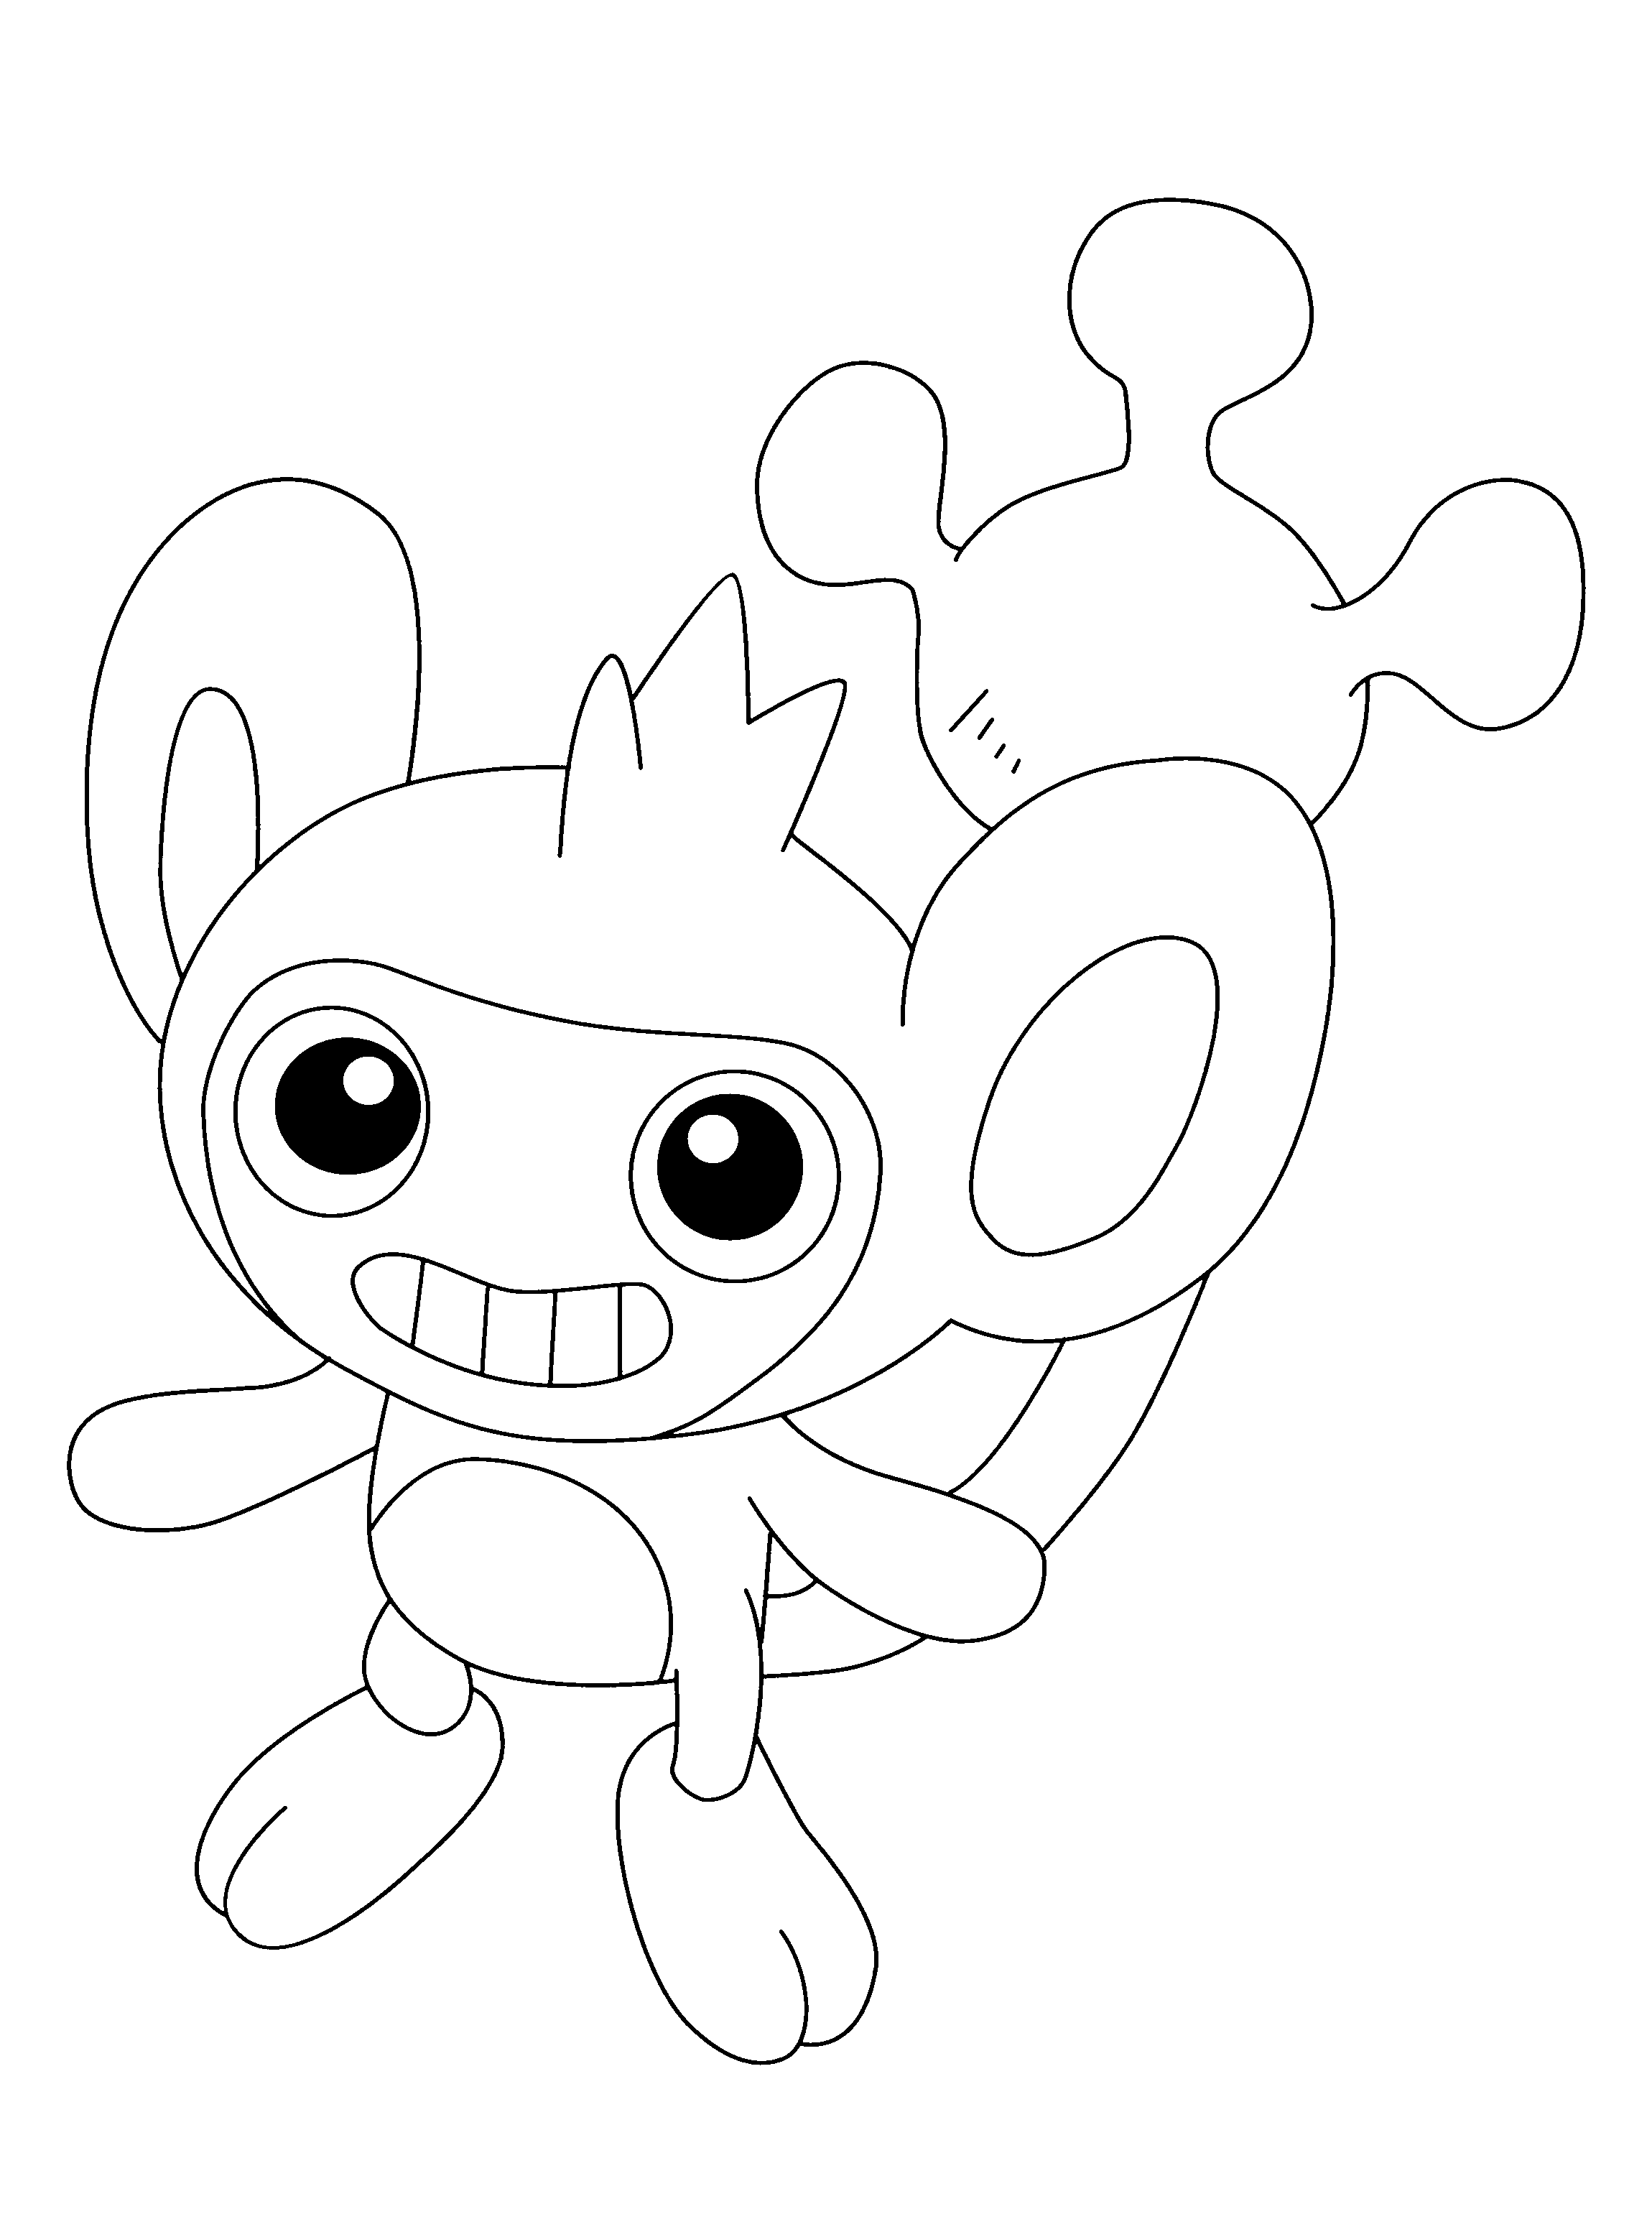 animated-coloring-pages-pokemon-image-0131